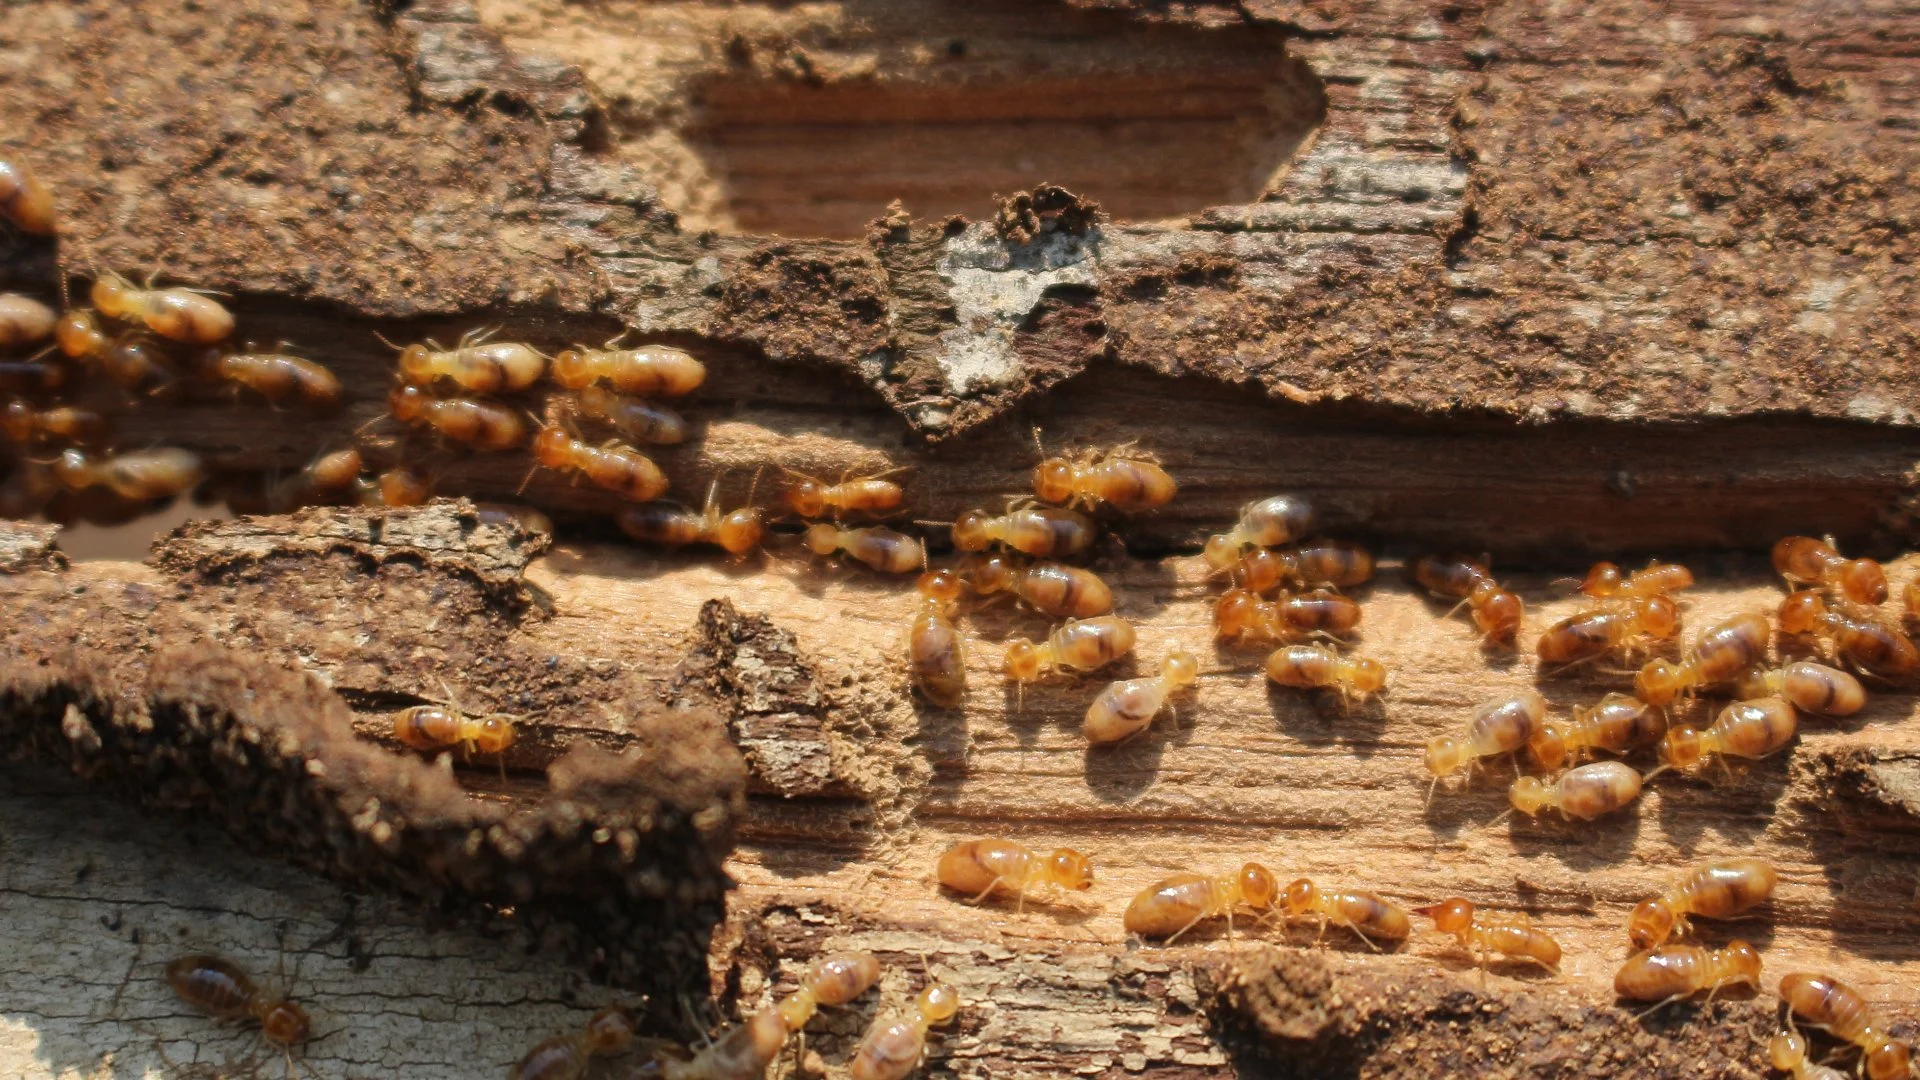 A Breakdown of the Different Ways to Treat Termite Infestations